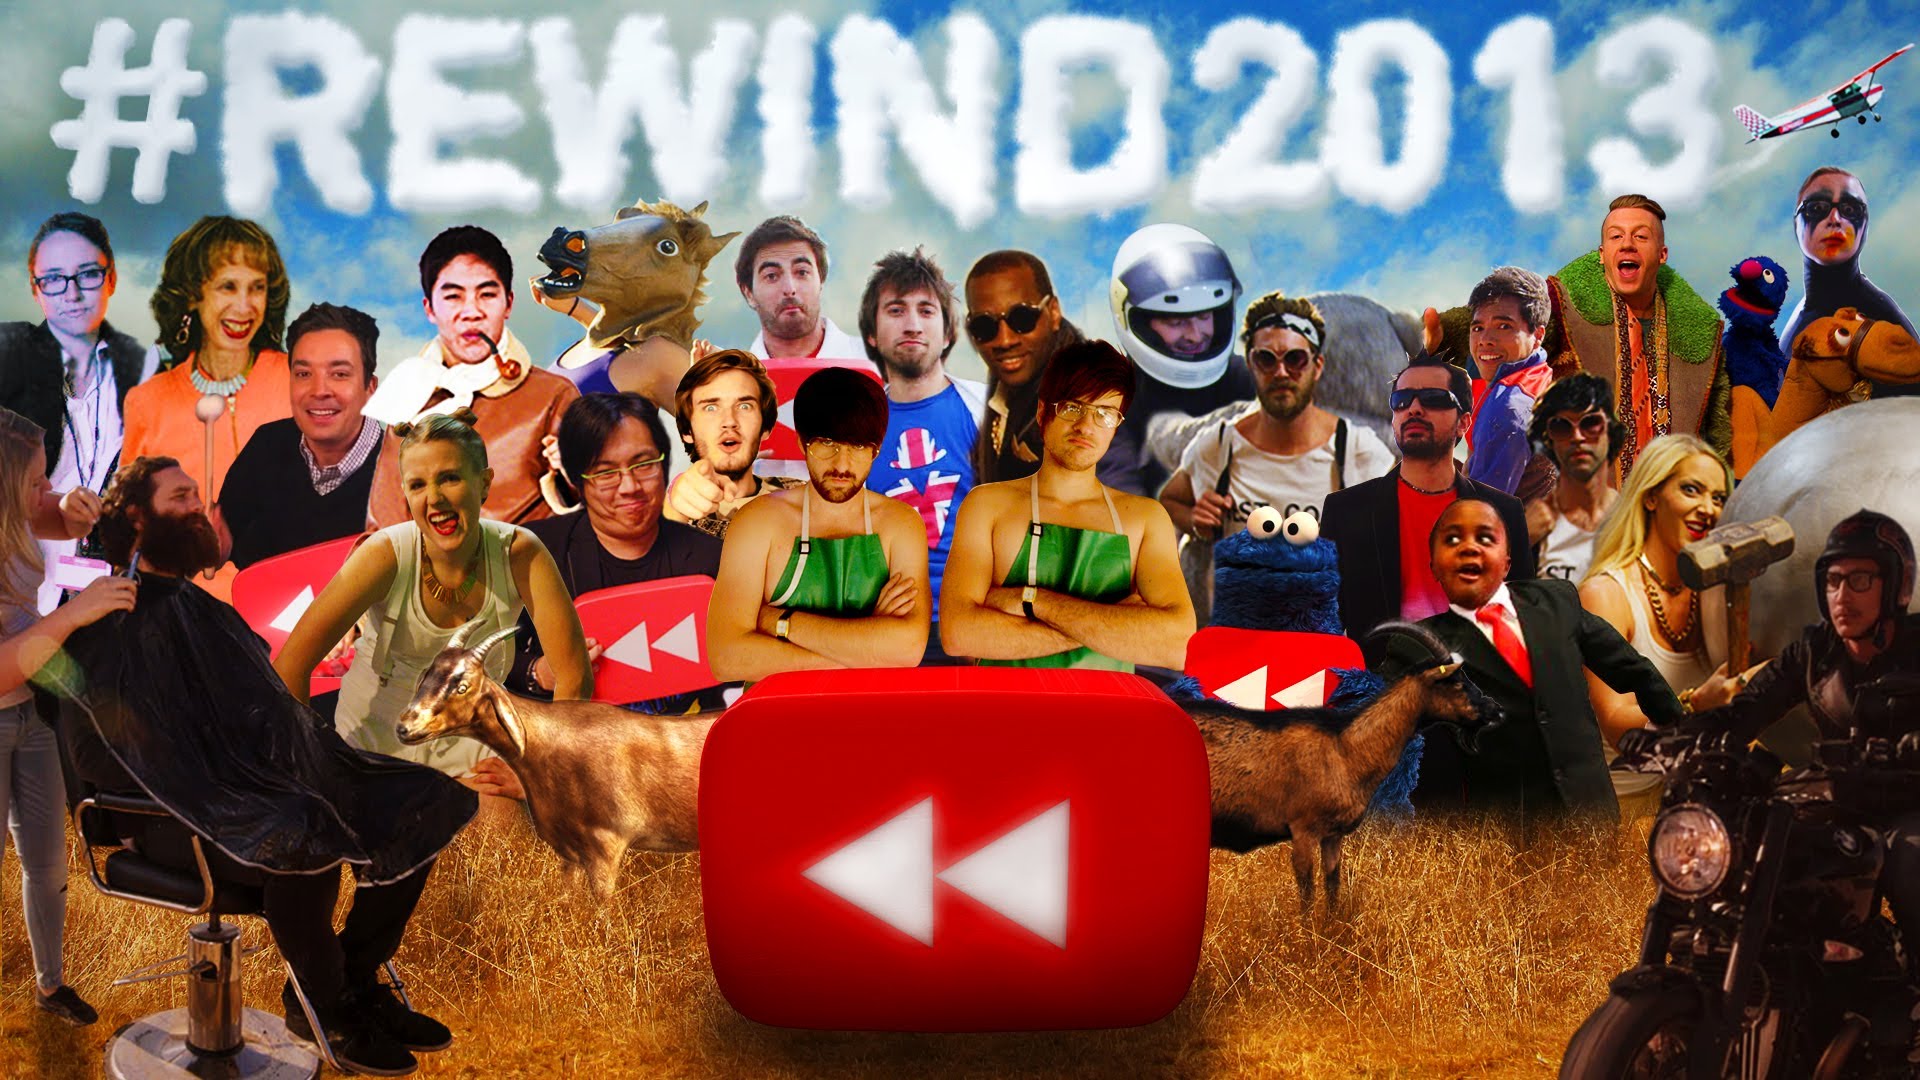 YouTube Rewind: What Does 2013 Say? [Cool Stuff]